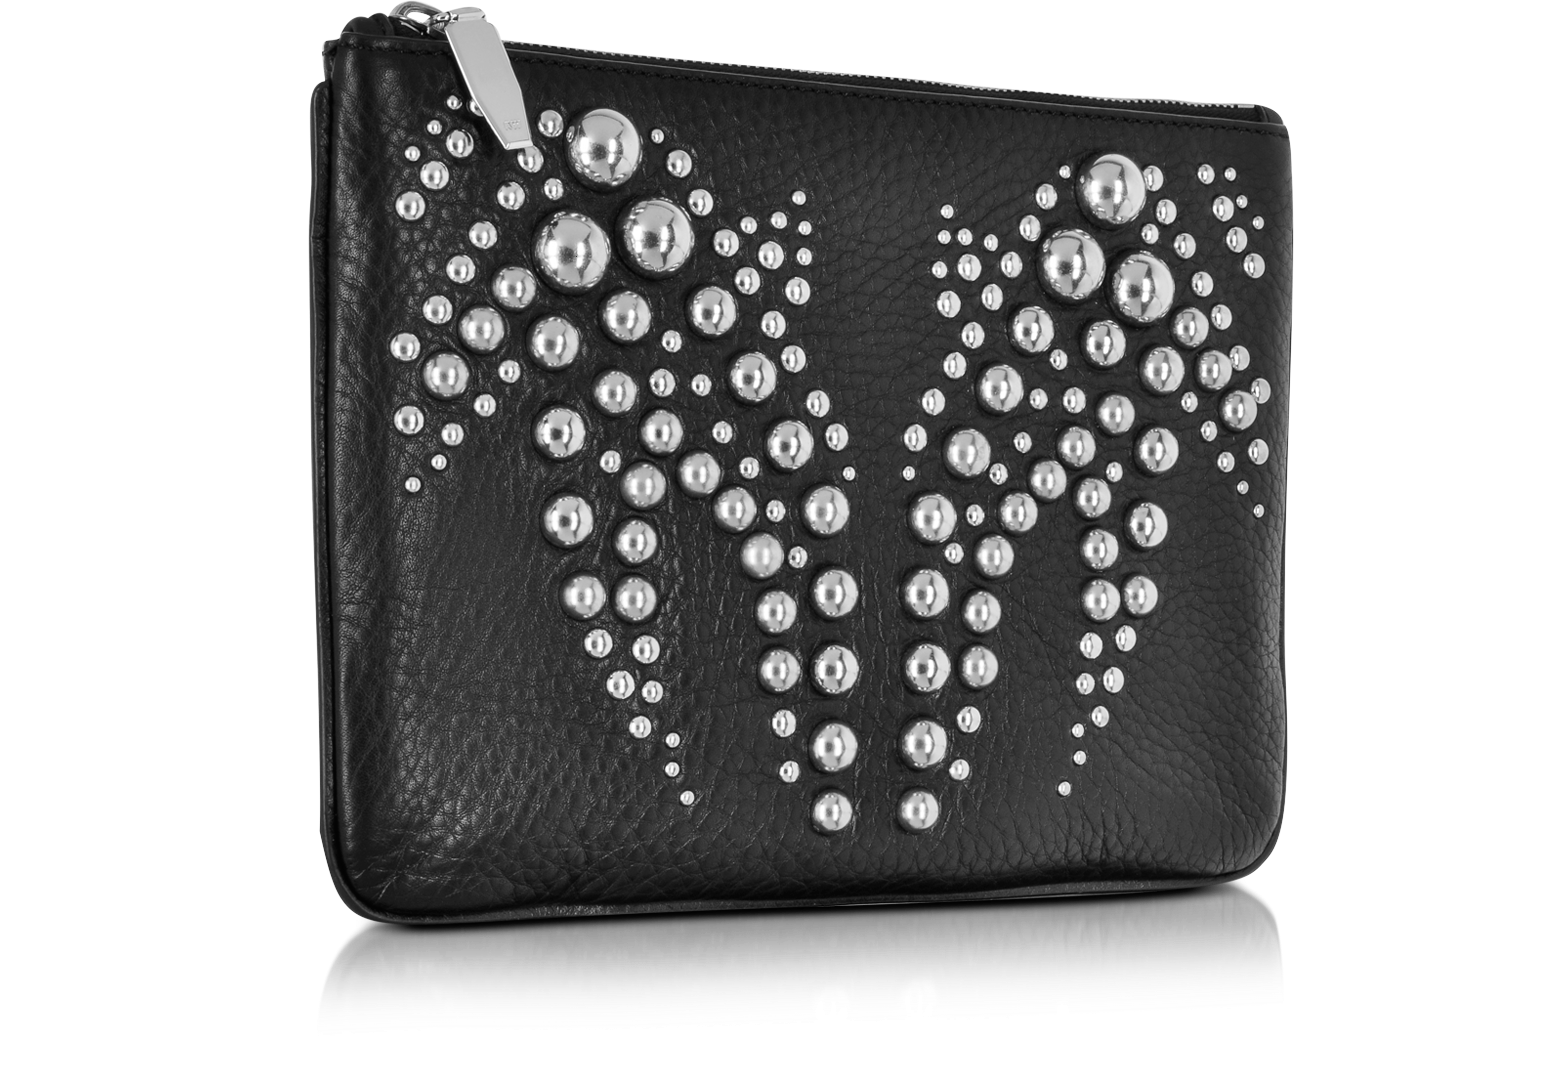 Alexander Wang Black Studded Soft Pebbled Leather Flat Pouch at FORZIERI